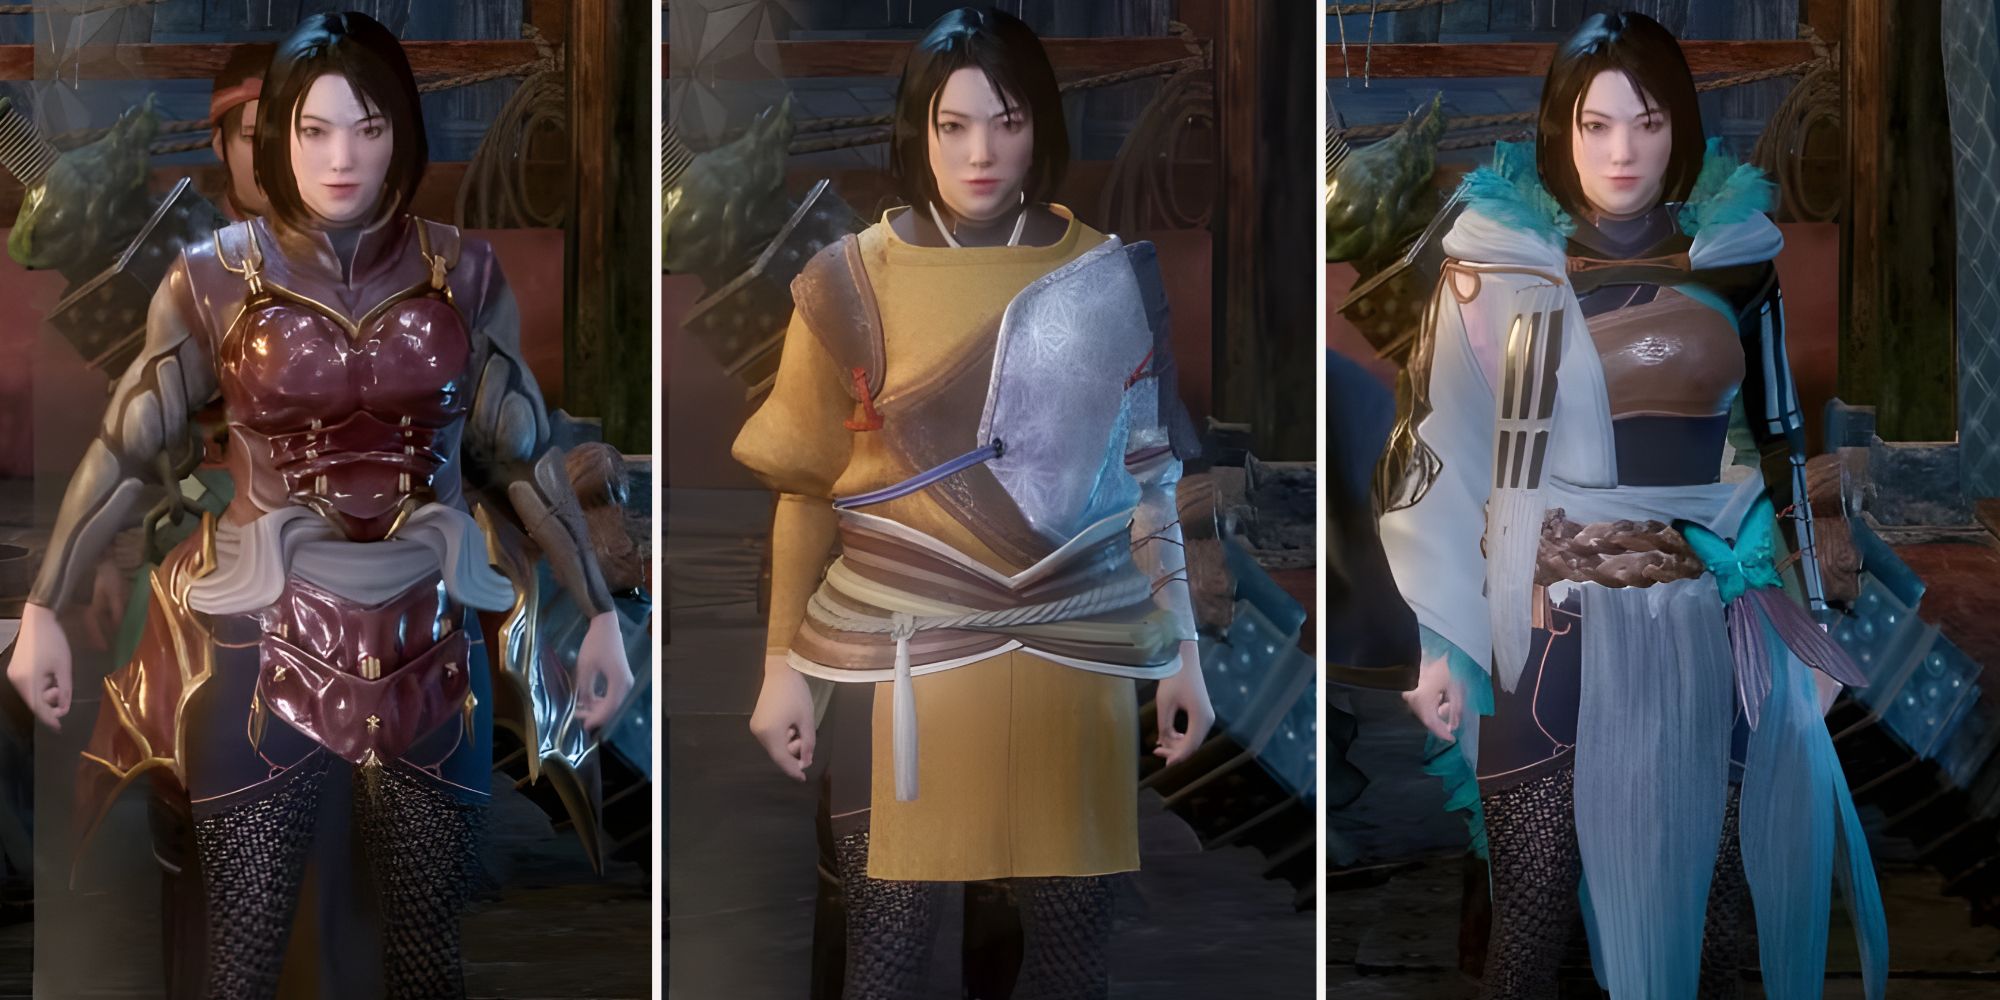 Wild Hearts Armor sets Draconic White Fang and Brighteye Archer